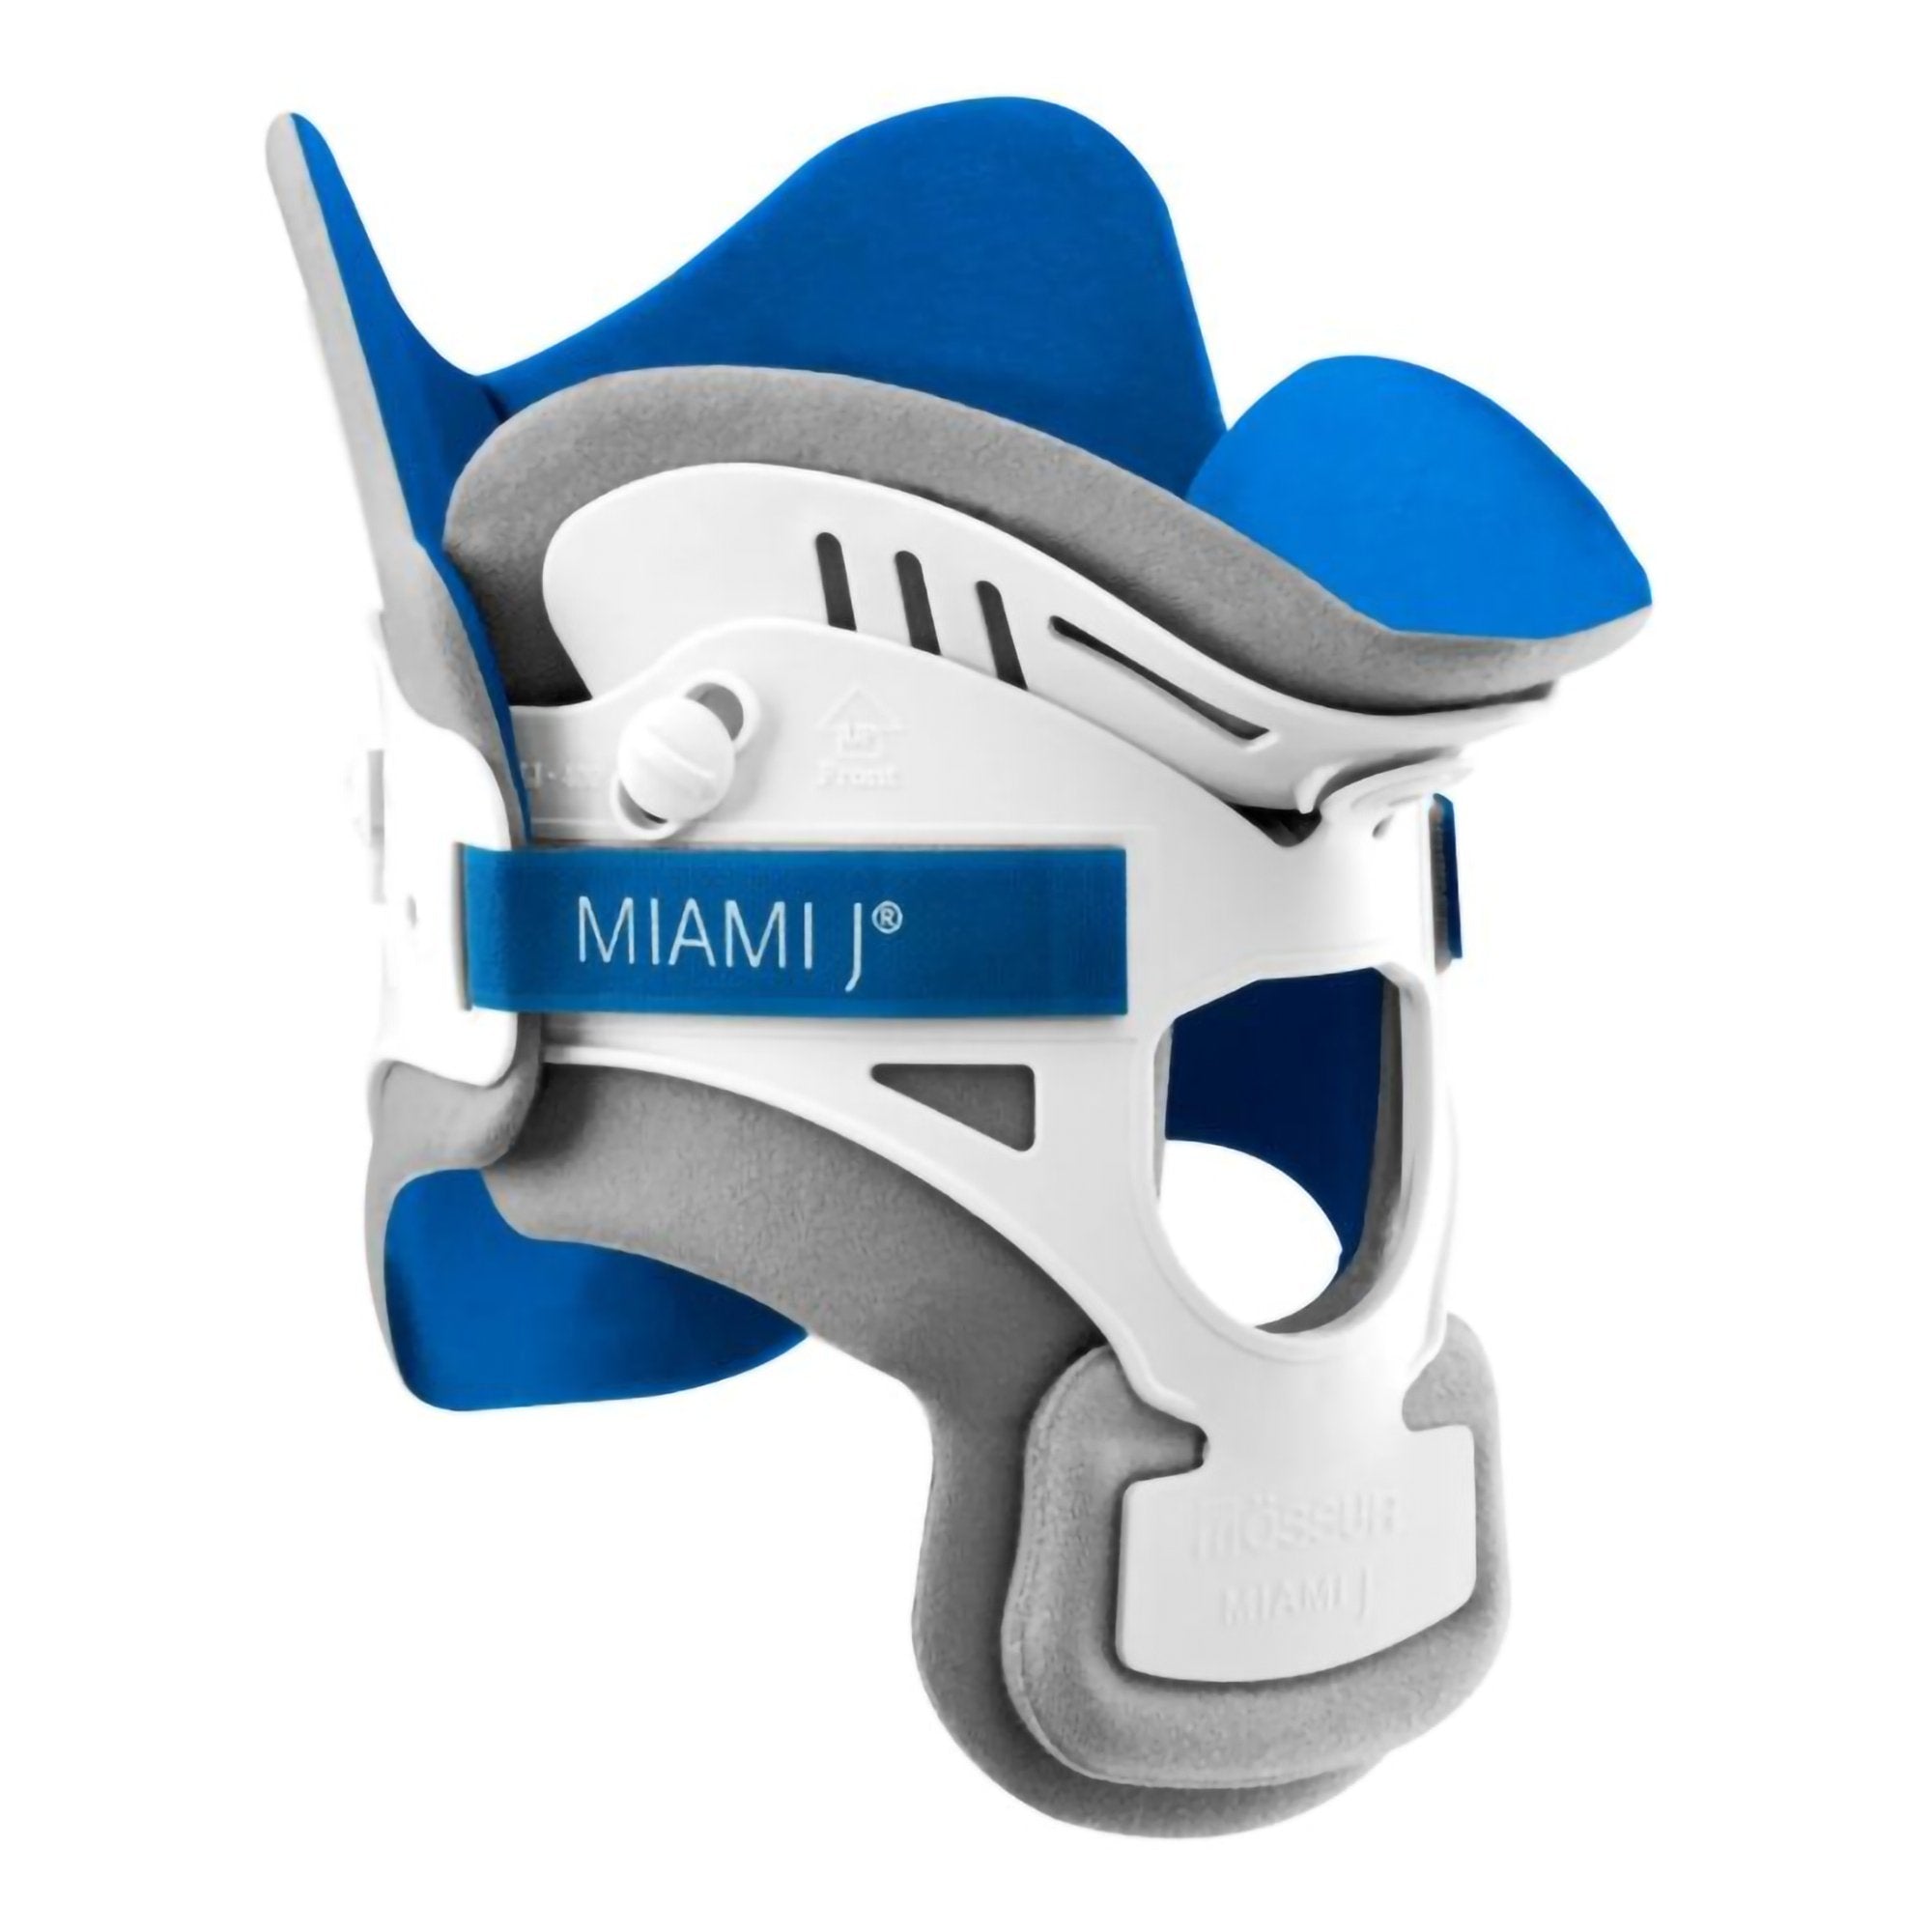 Rigid Cervical Collar Miami J® Preformed Adult Bariatric Two-Piece / Trachea Opening